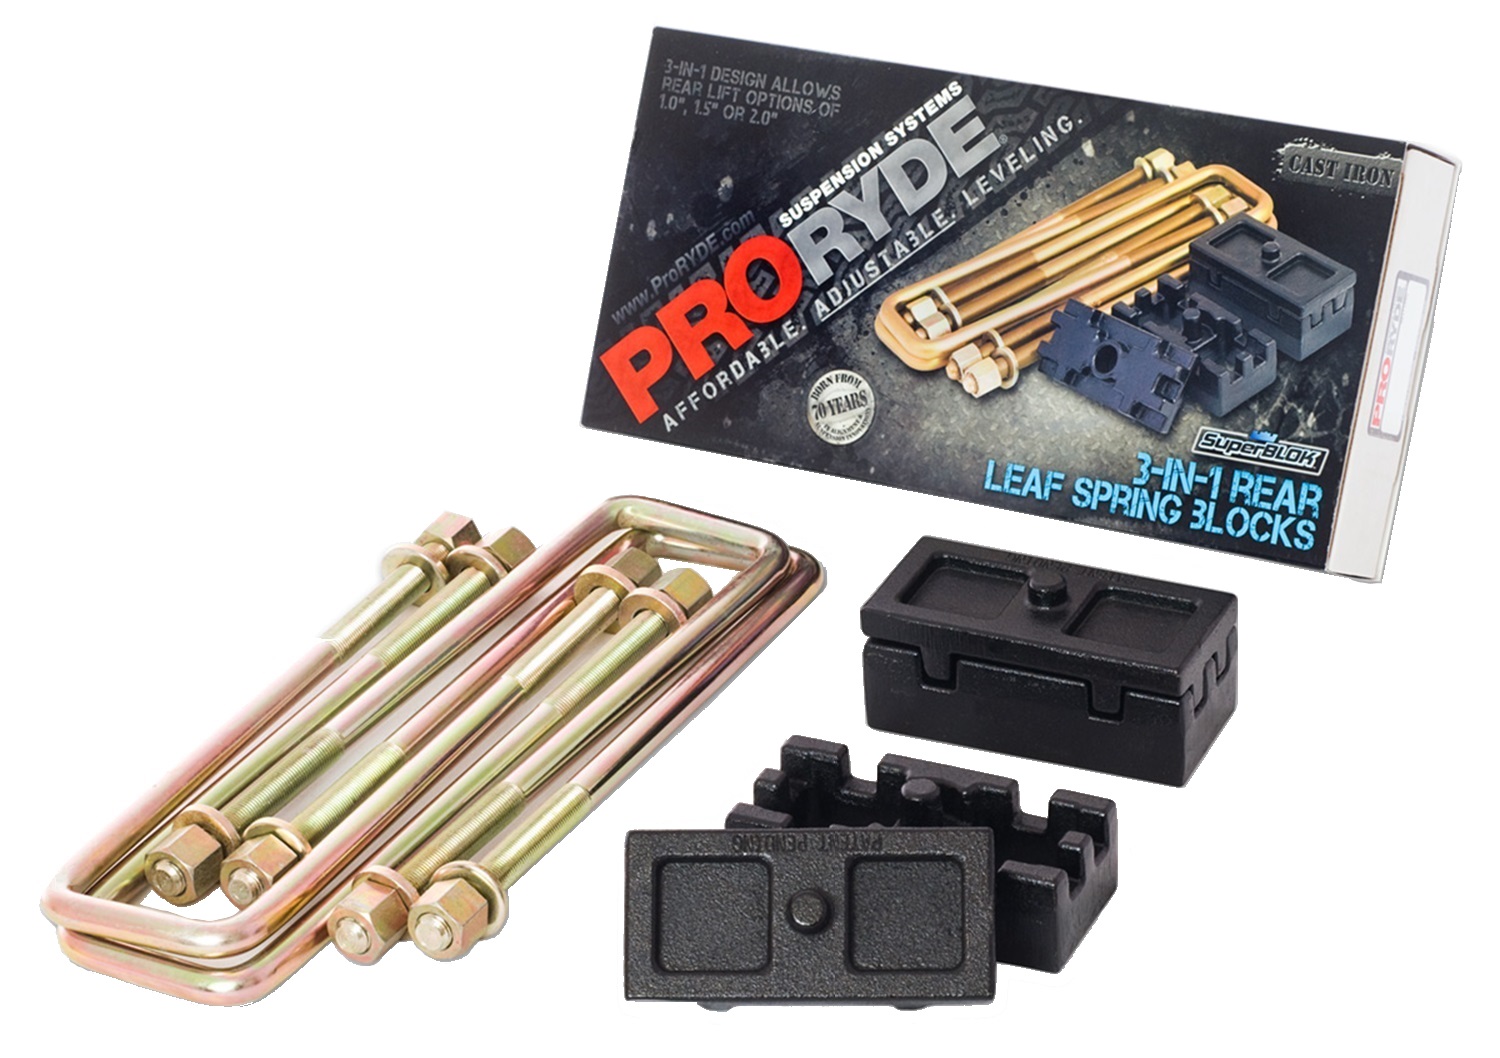 ProRYDE Suspension Systems ProRYDE Suspension Systems 52-1200G SuperBlok 3 In 1 Block Kit